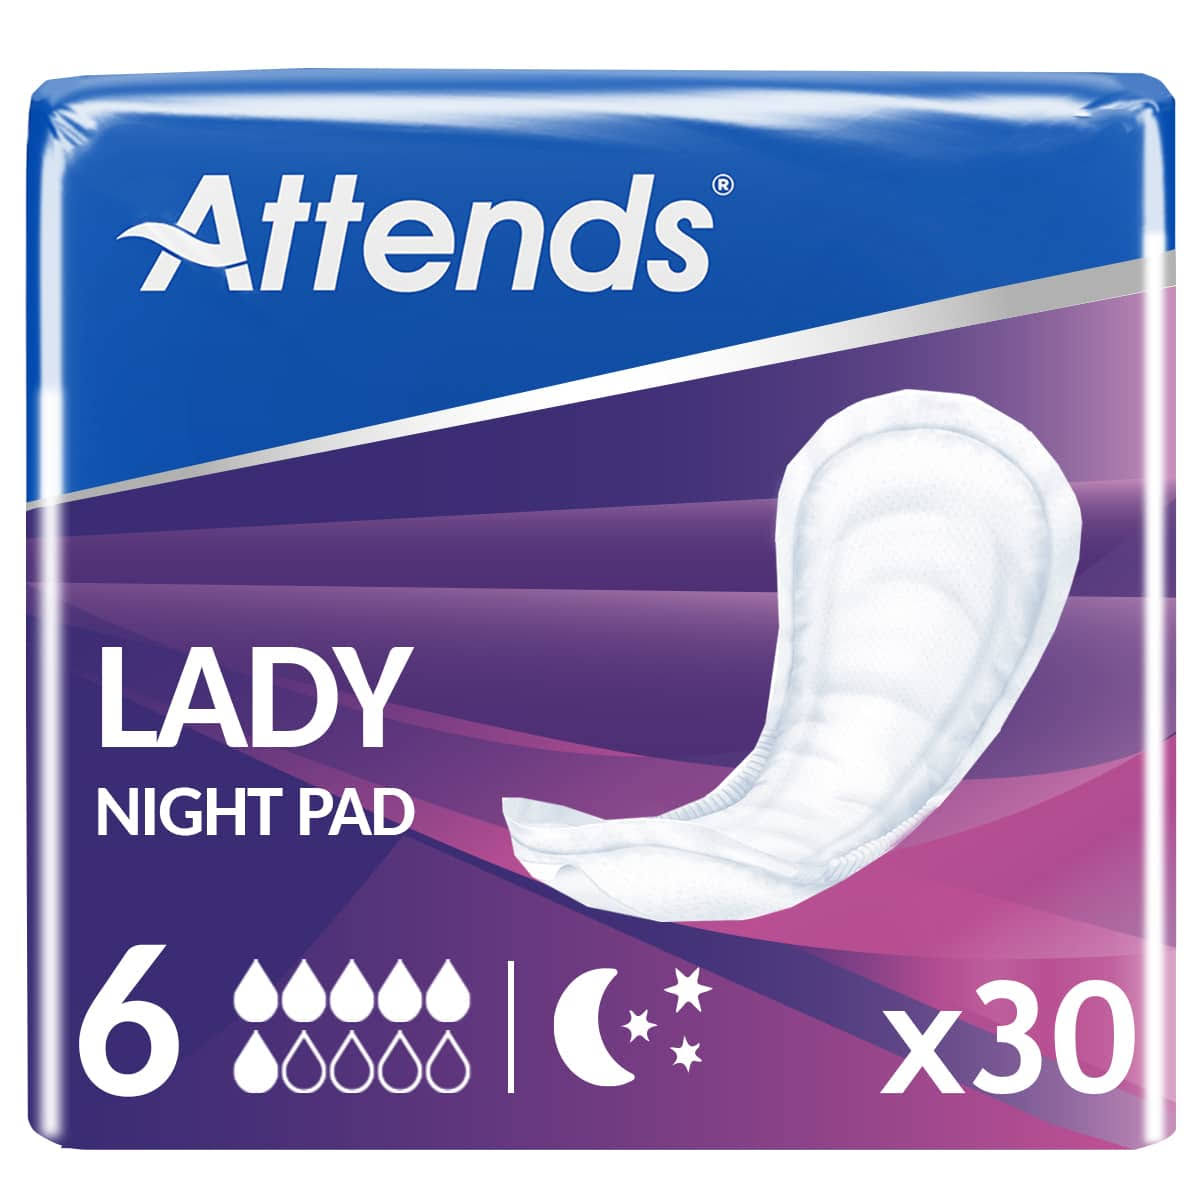 Attends Lady Night Pad 6 (1124ml) 30 Pack